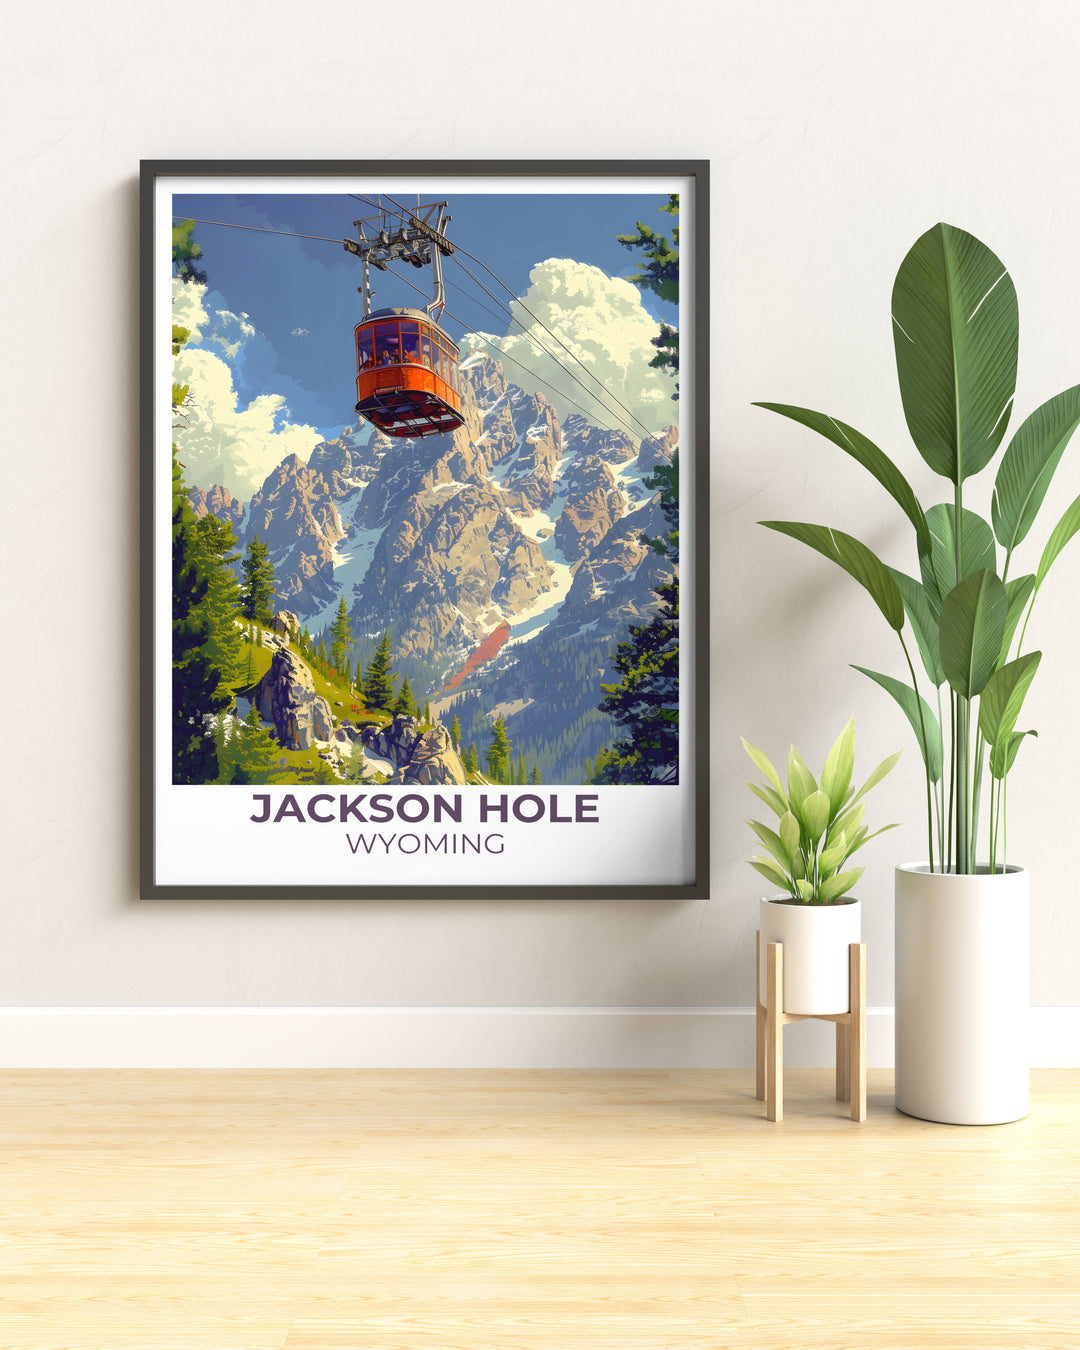 Jackson Hole poster focusing on the iconic vistas of Teton Mountains ideal for collectors of travel and nature art